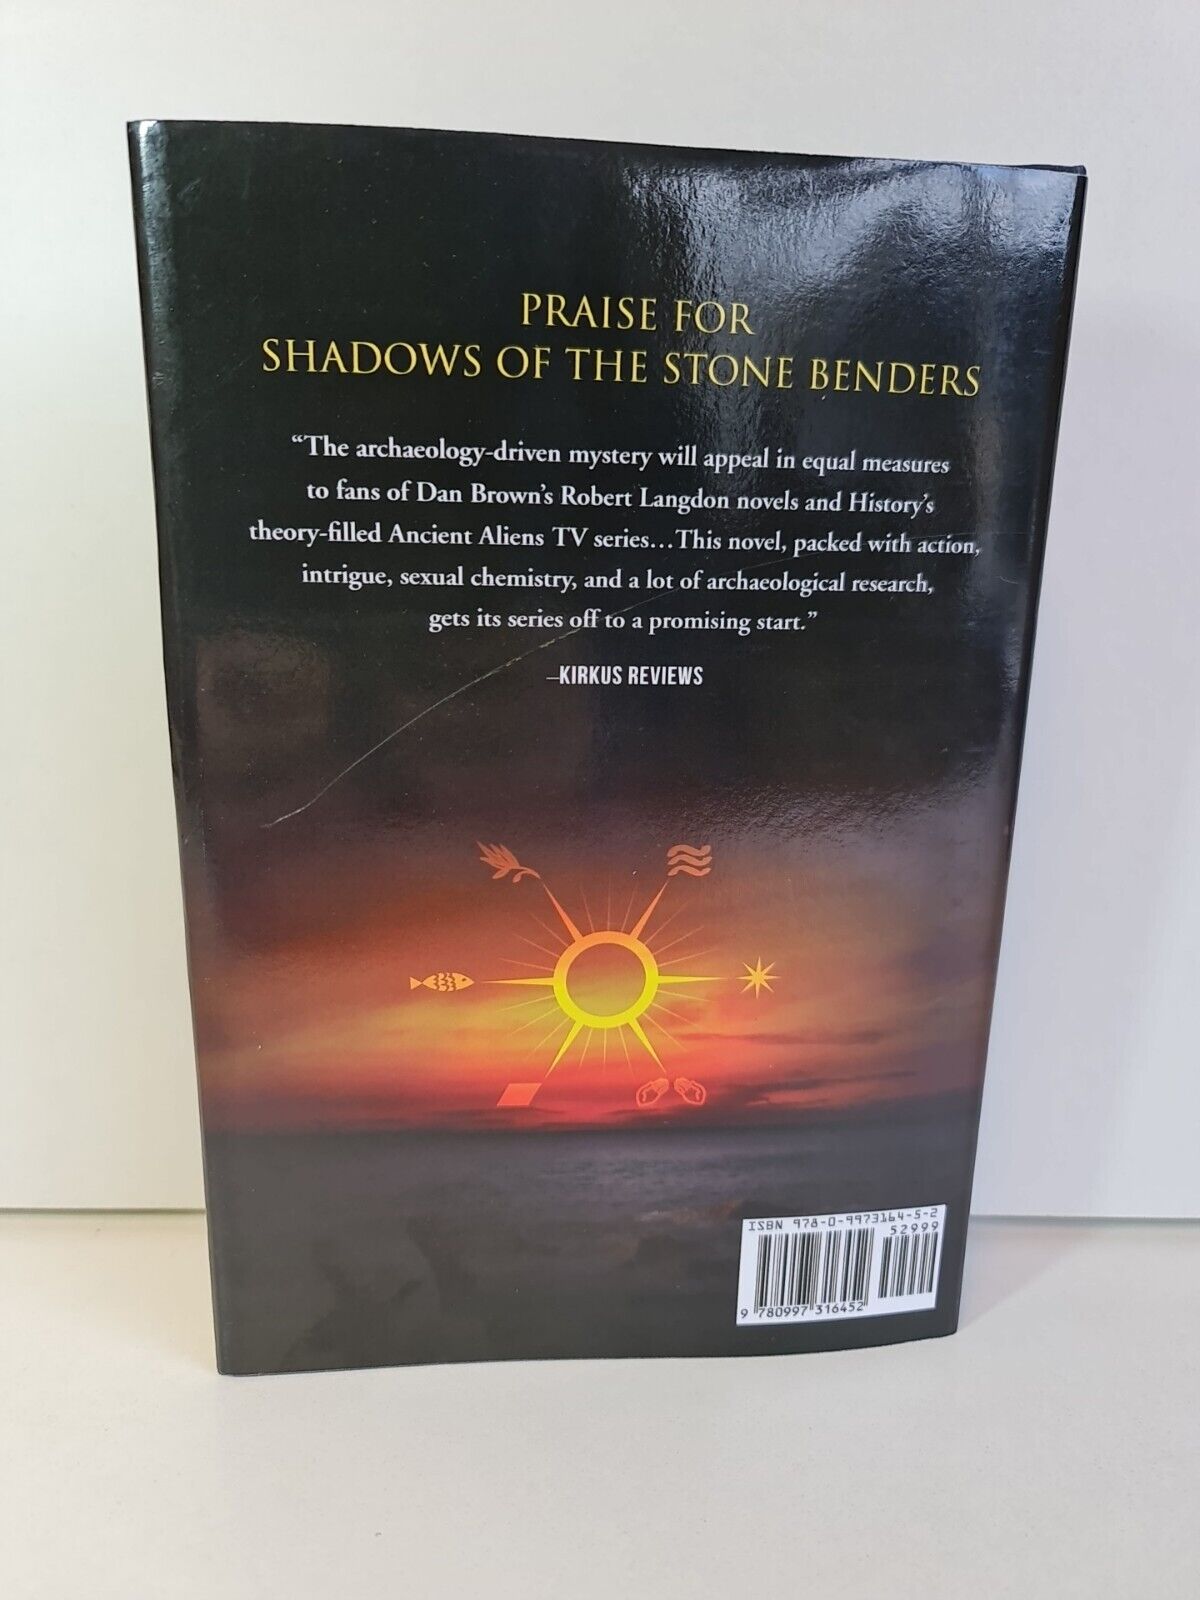 Shadows of the Stone Benders by K Patrick Donoghue (2020)